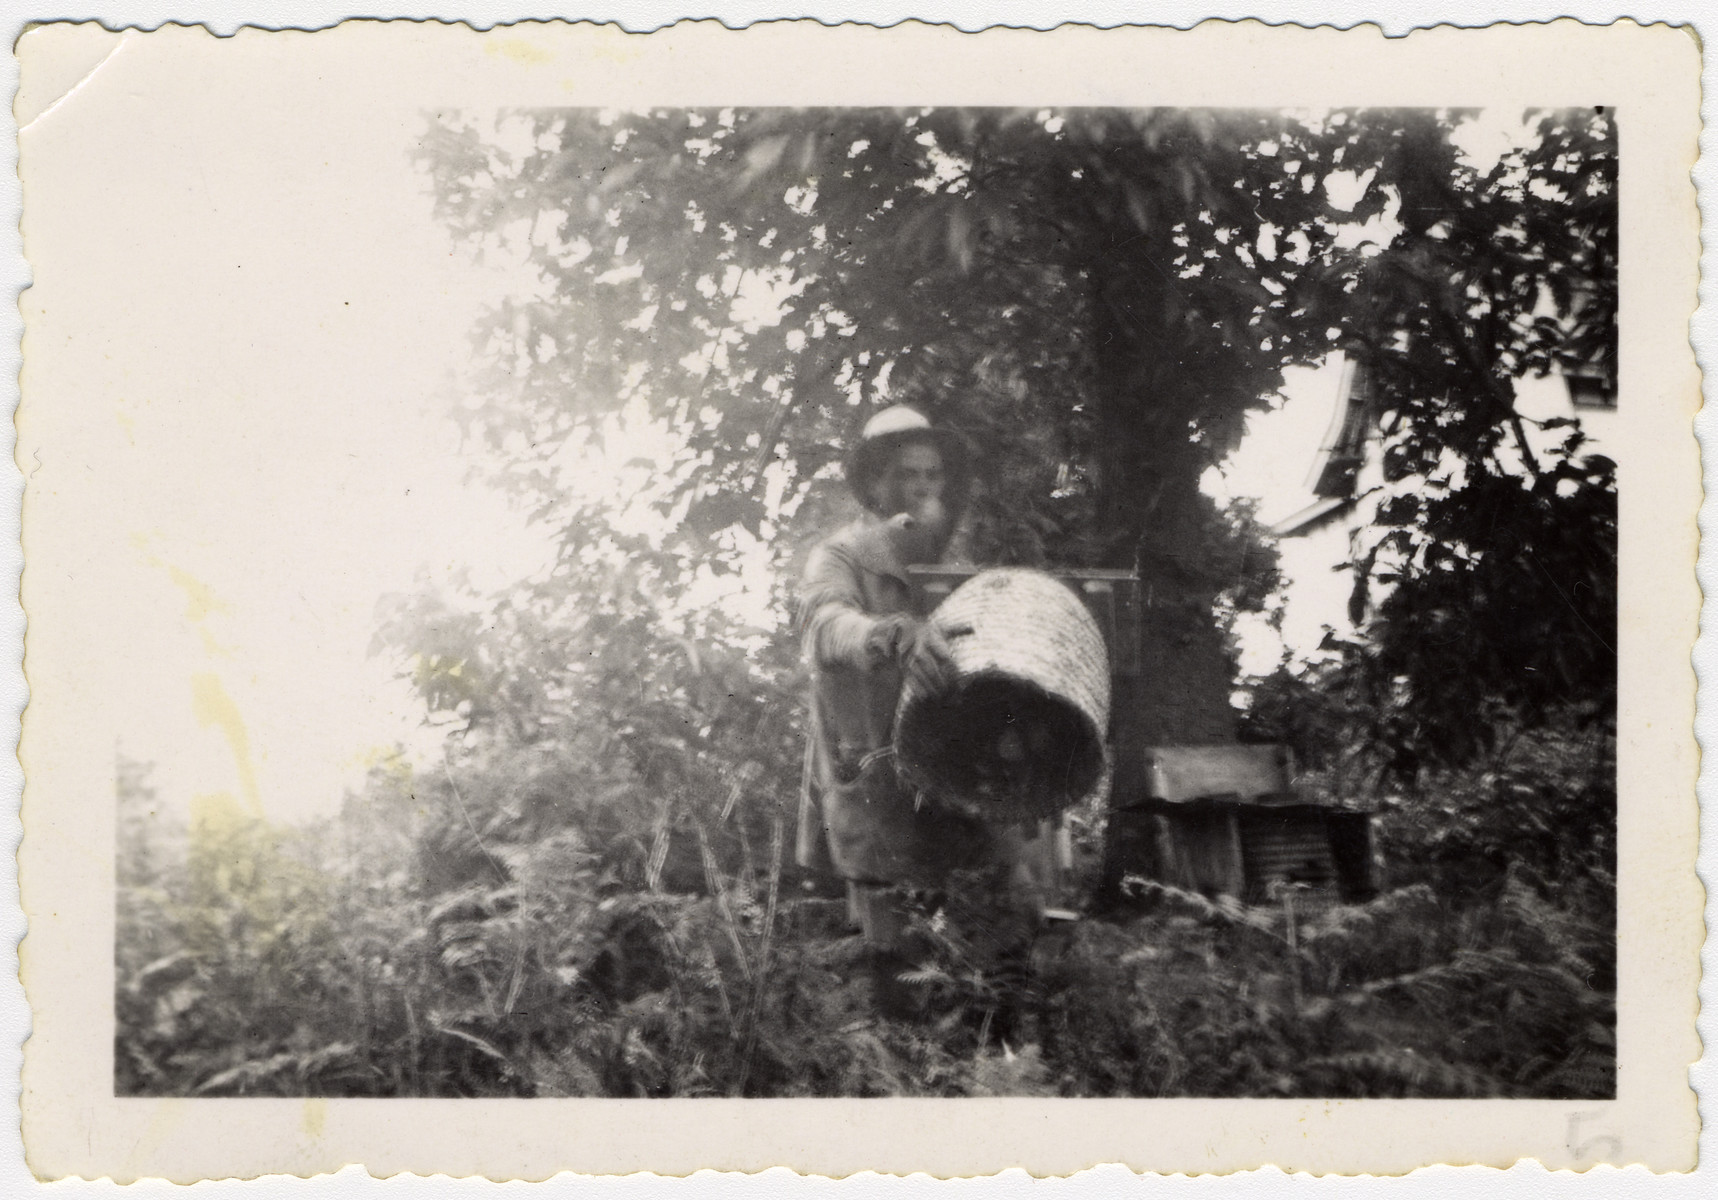 Izhak tends the beehives in the La Ramee agricultural school.

The school was established after Jewish students were expelled from general schools  and directed by Haroun Tazieff.